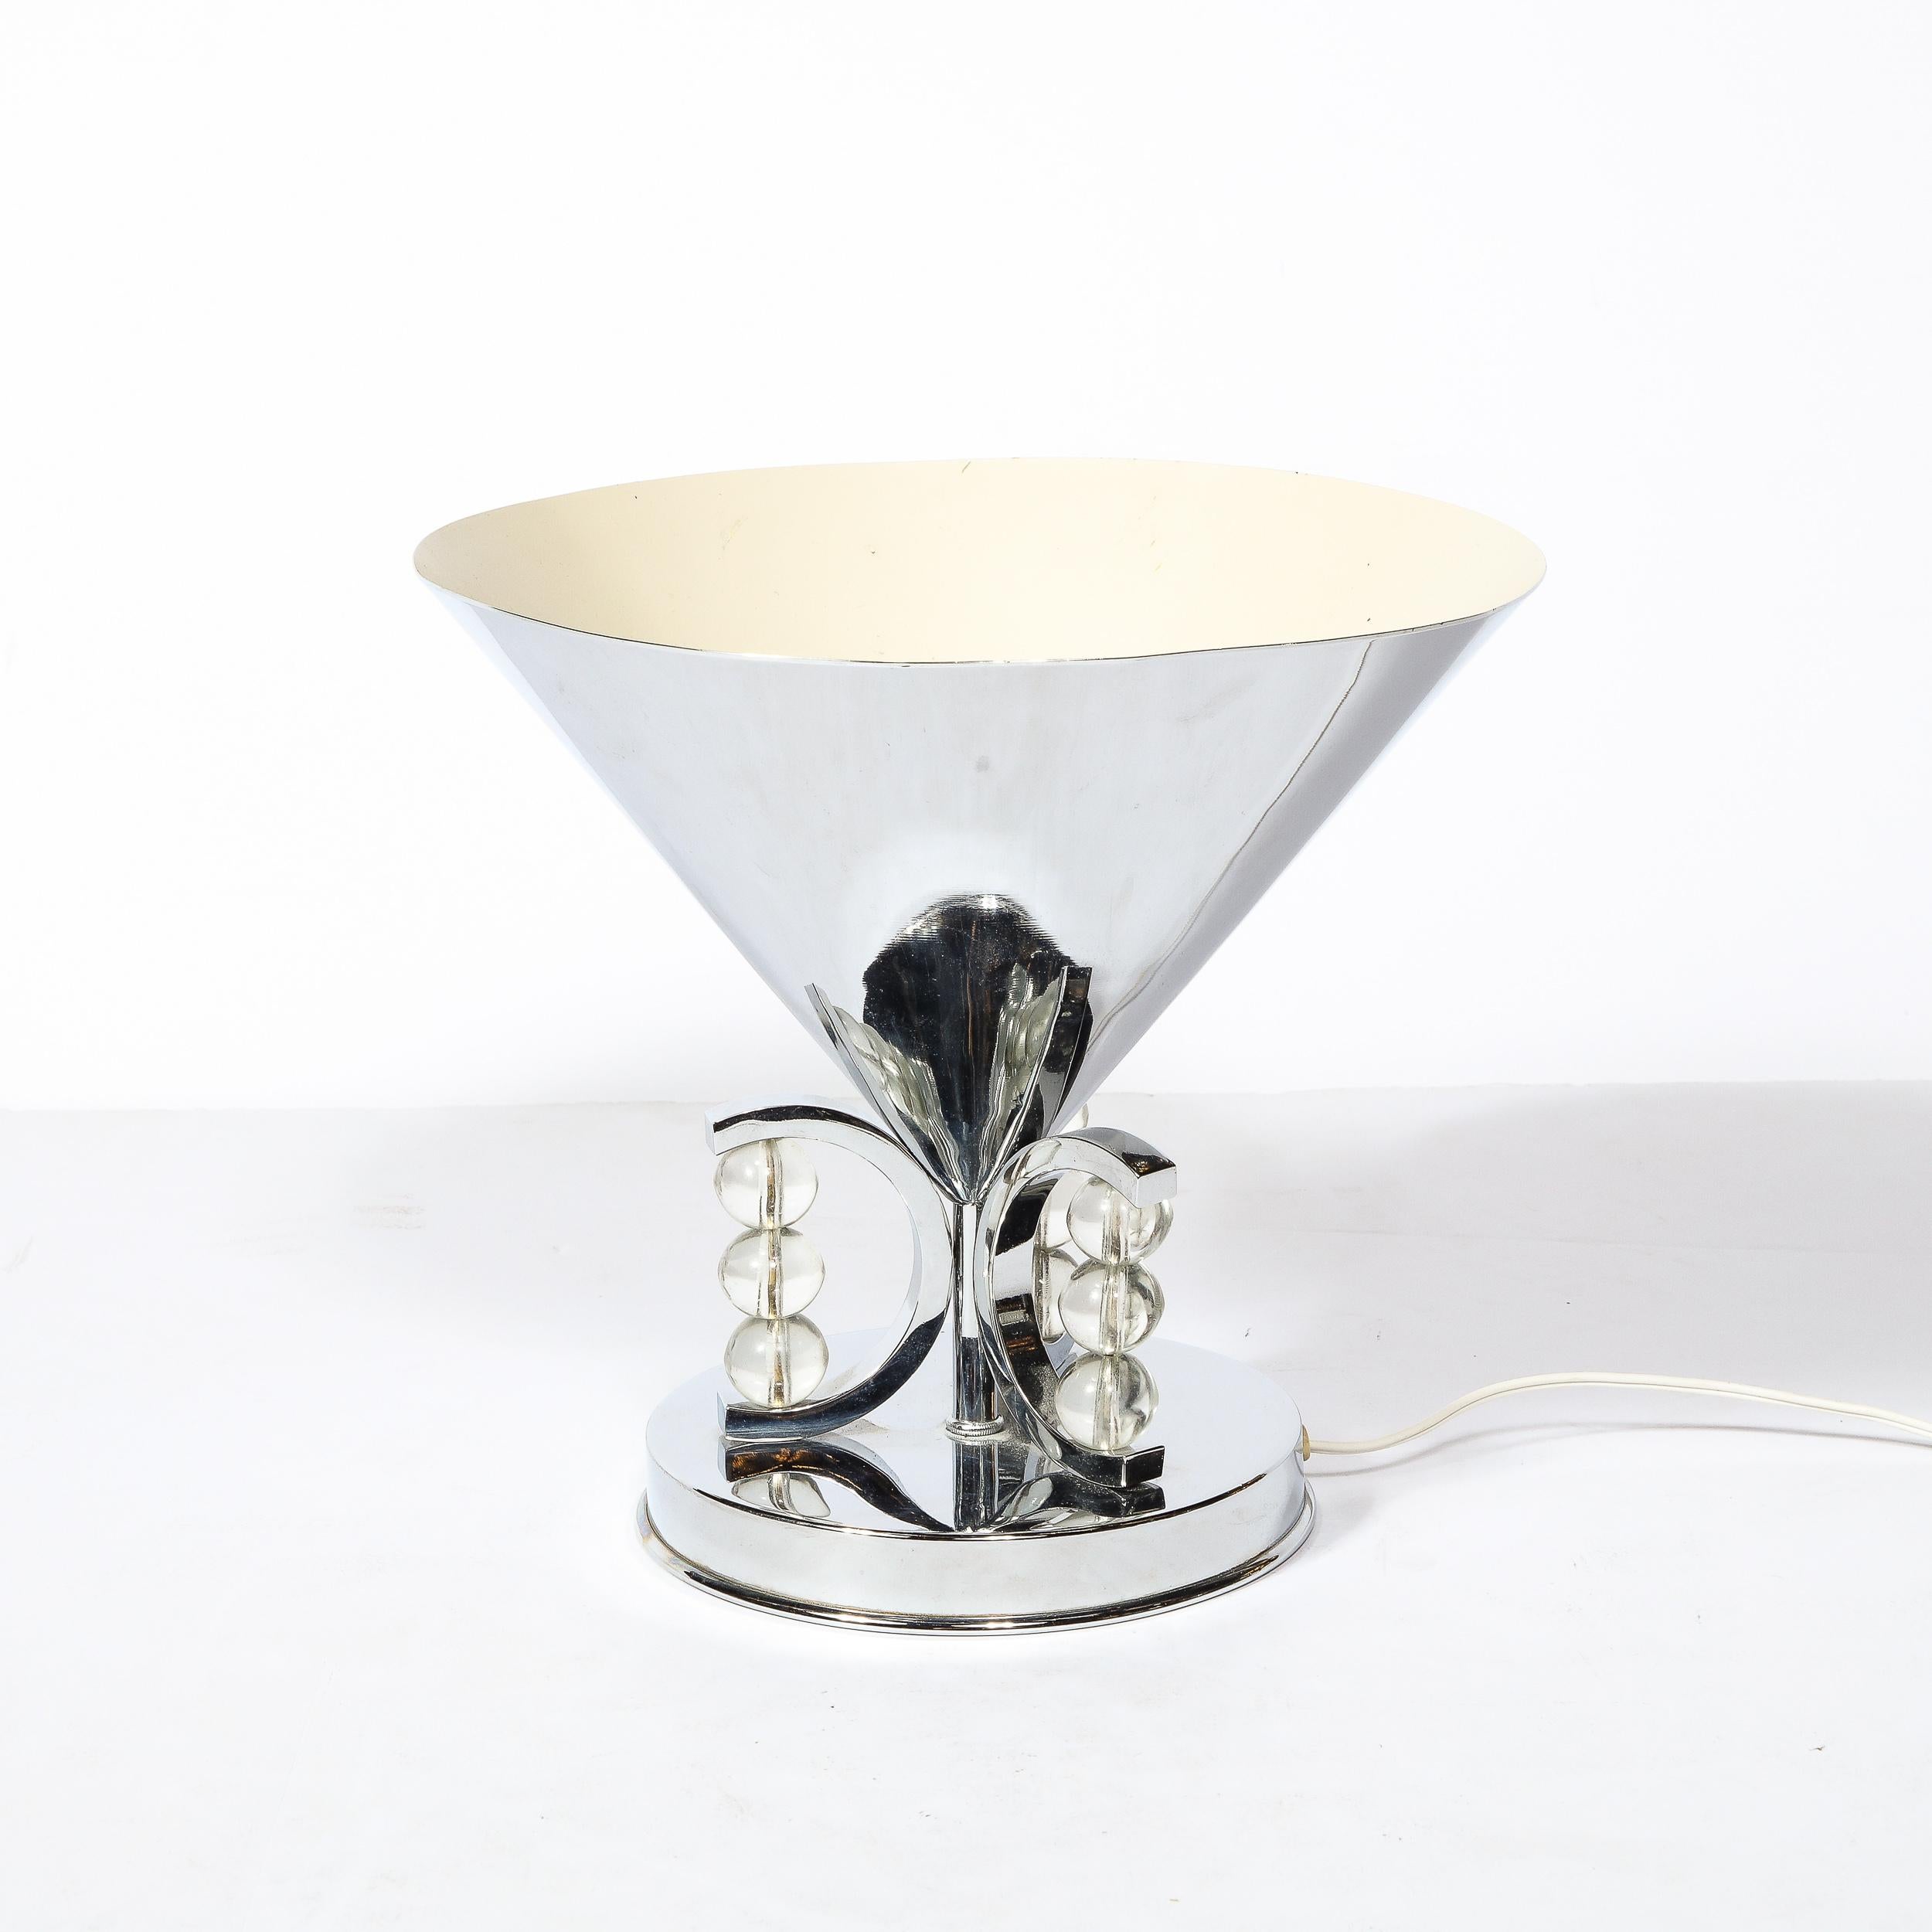 Art Deco Conical Uplight Table Lamp in Chrome with Stacked Glass Ball Detailing For Sale 2